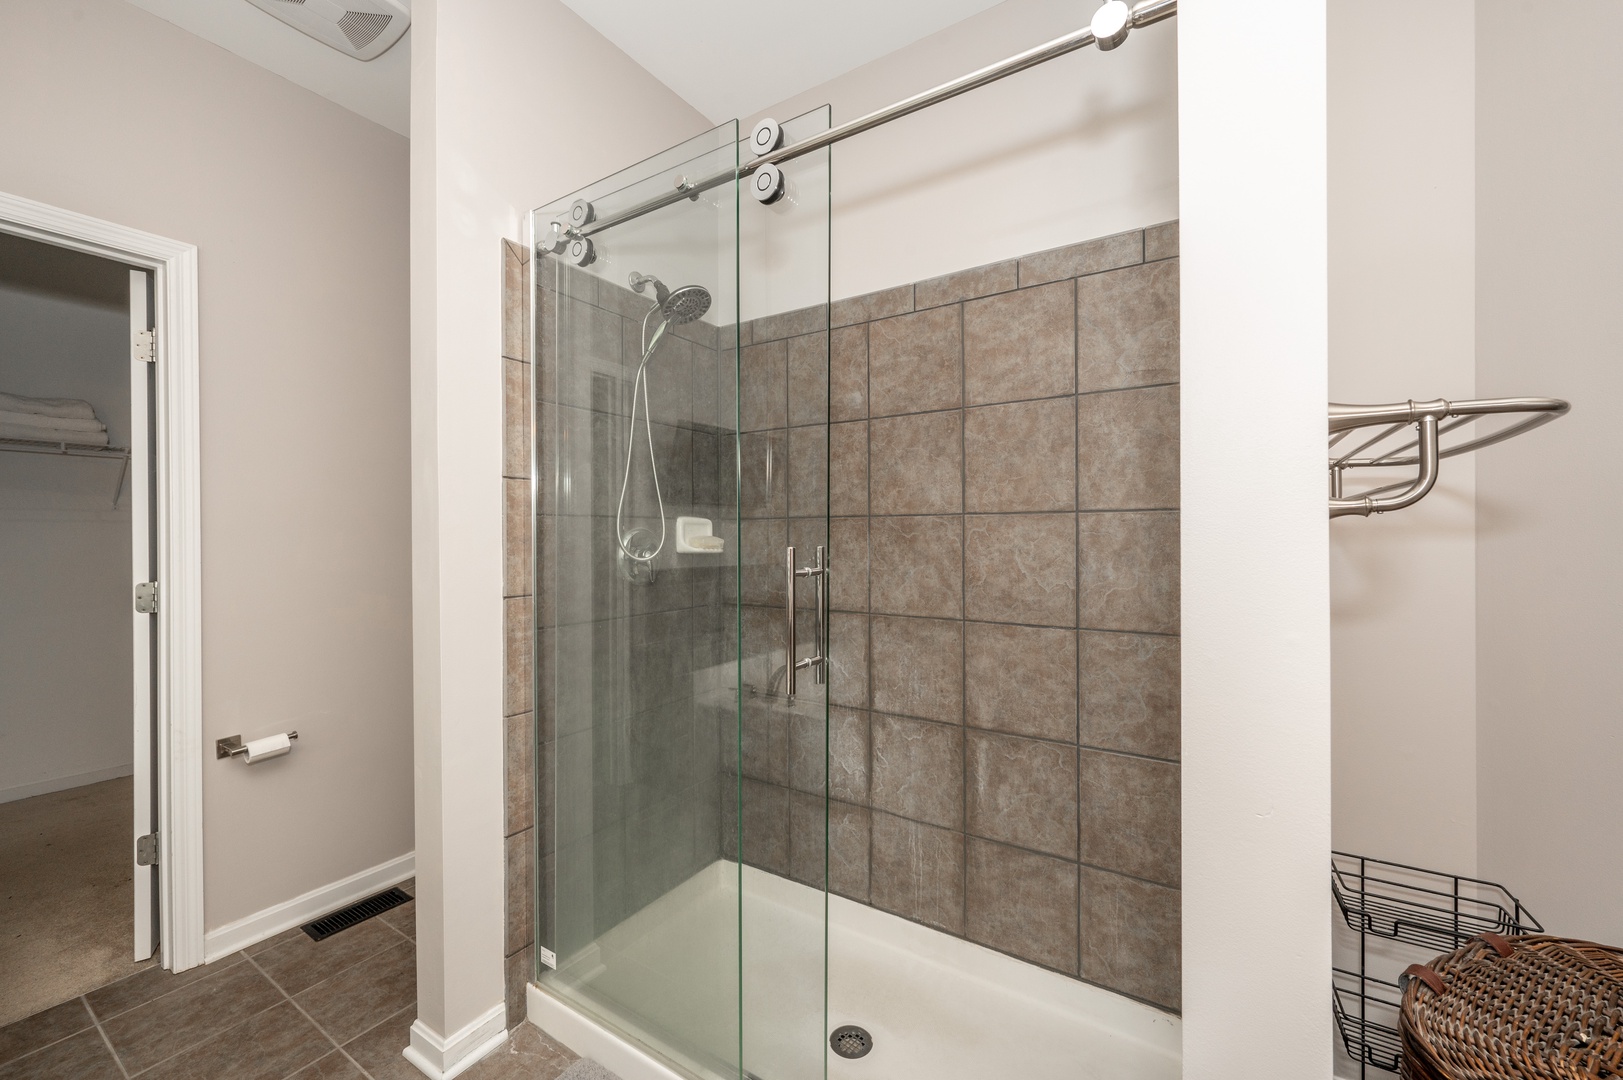 The 1st floor king en suite offers a chic double vanity, shower, & soaking tub